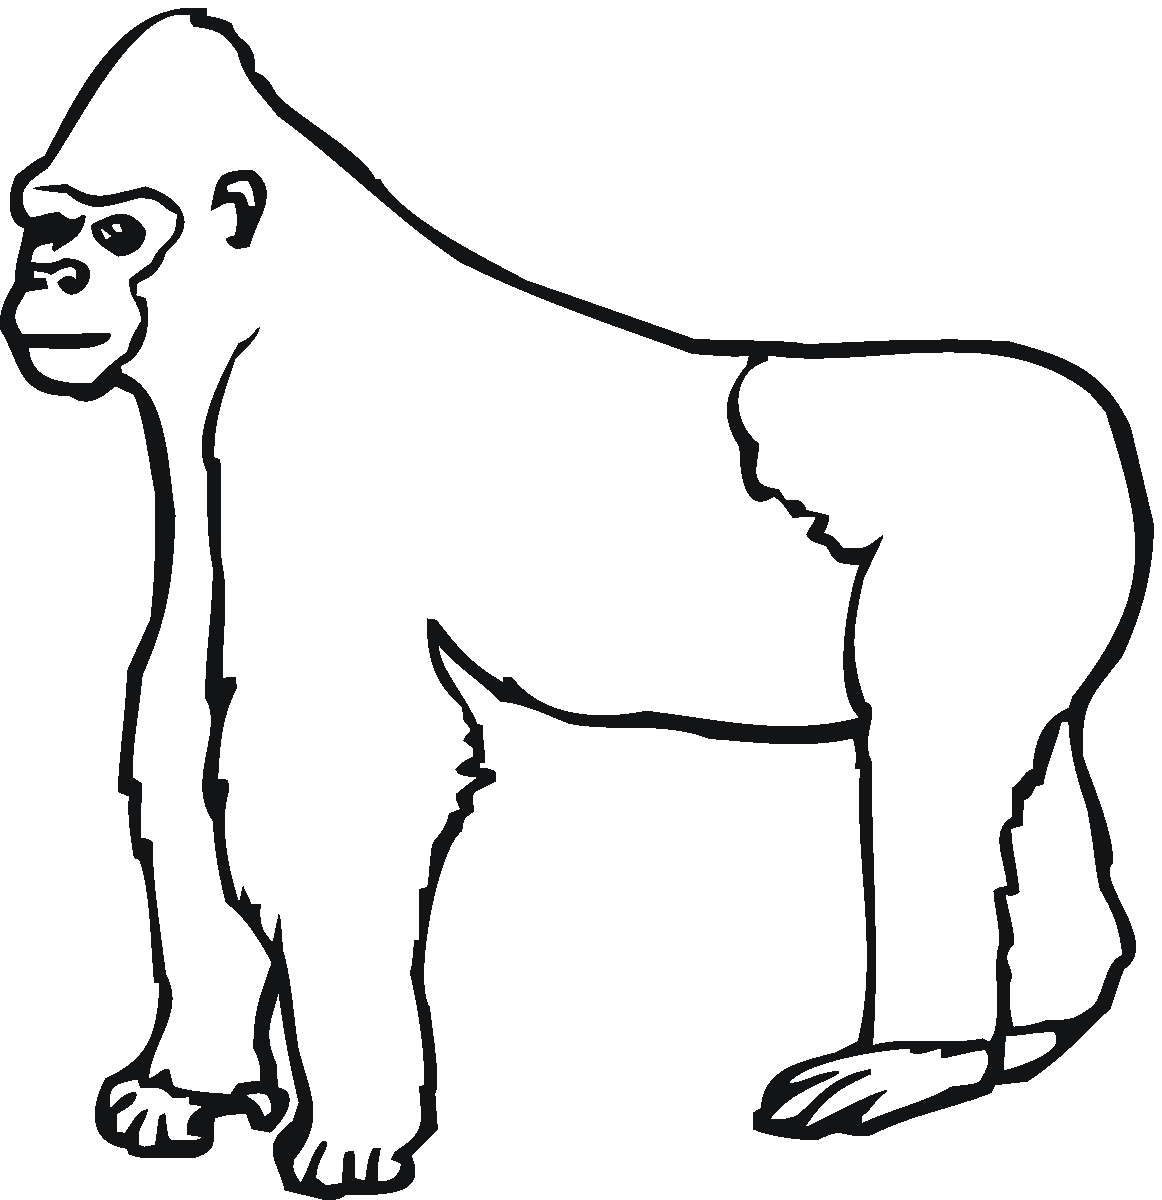 Gorilla Ape | Clipart library - Free Clipart Images